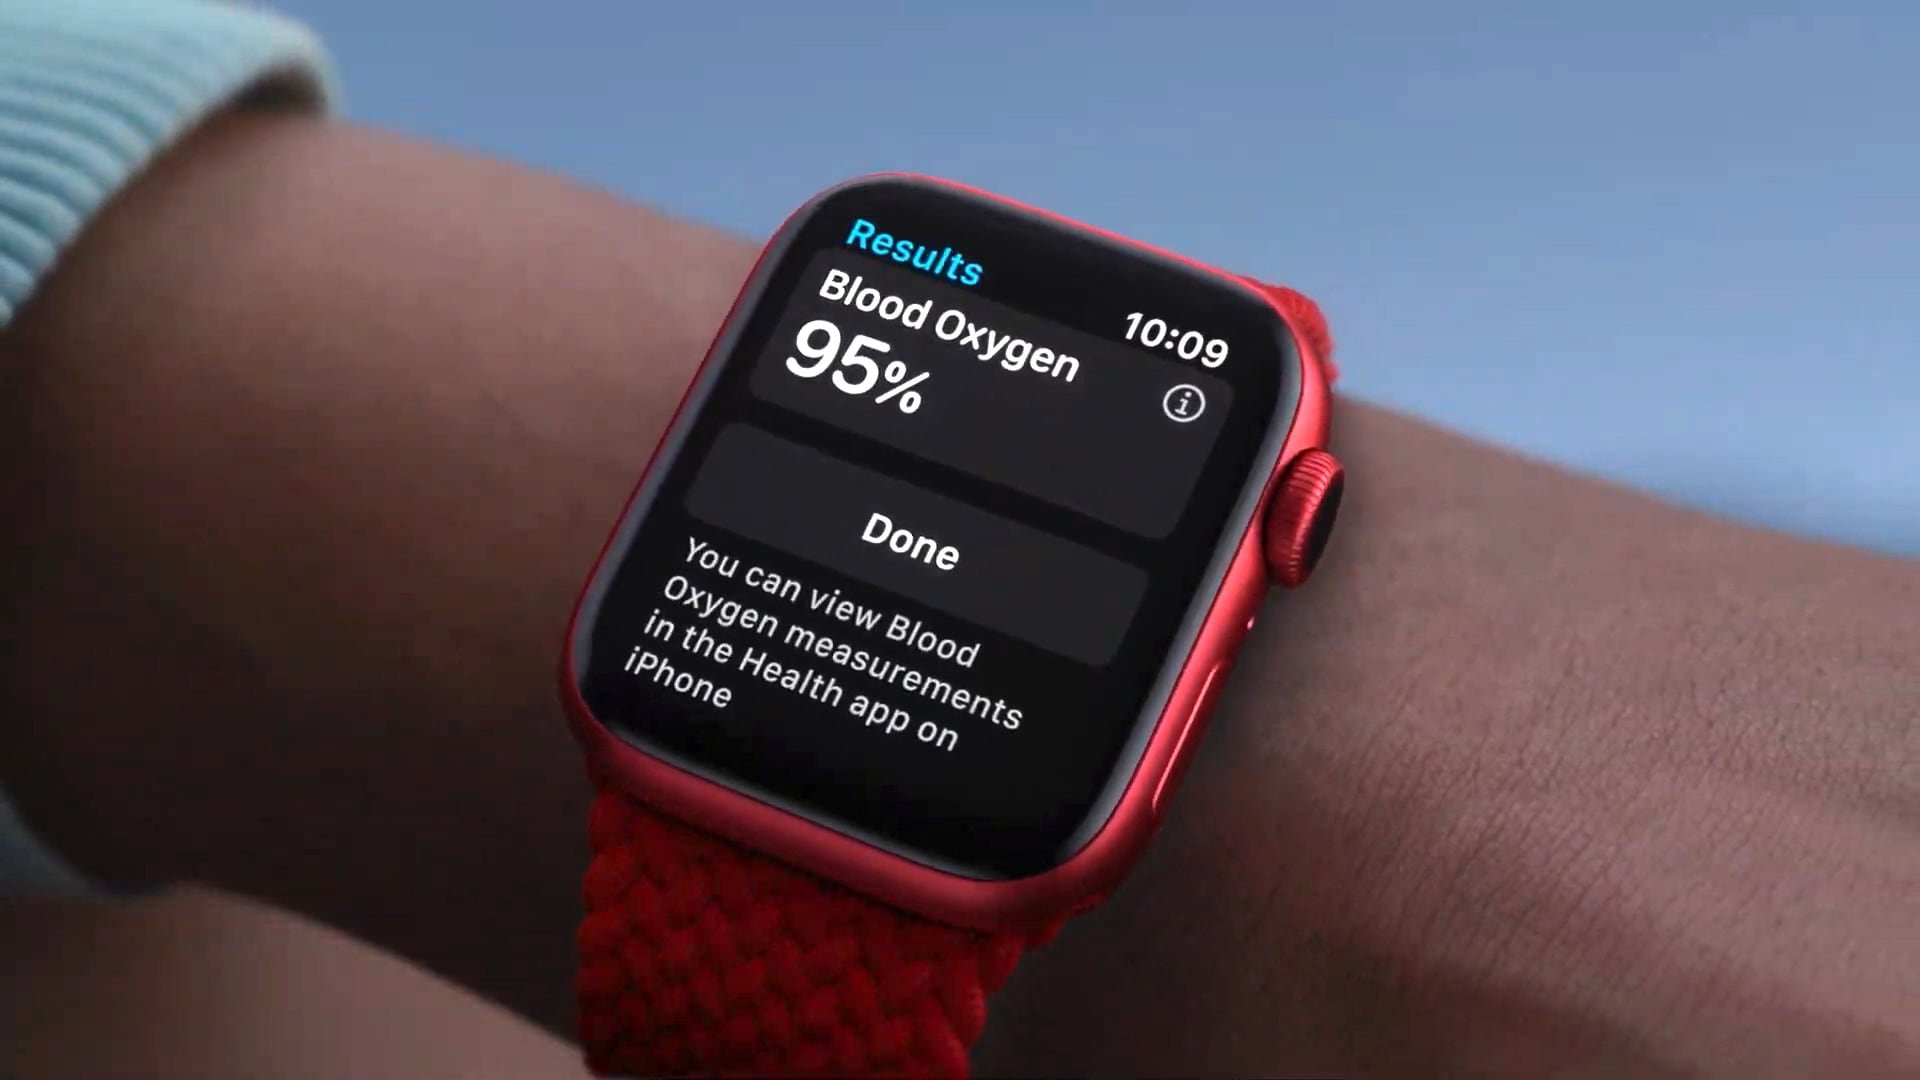 Apple Watch Series 6 always-on smartwatch can measure your blood oxygen level